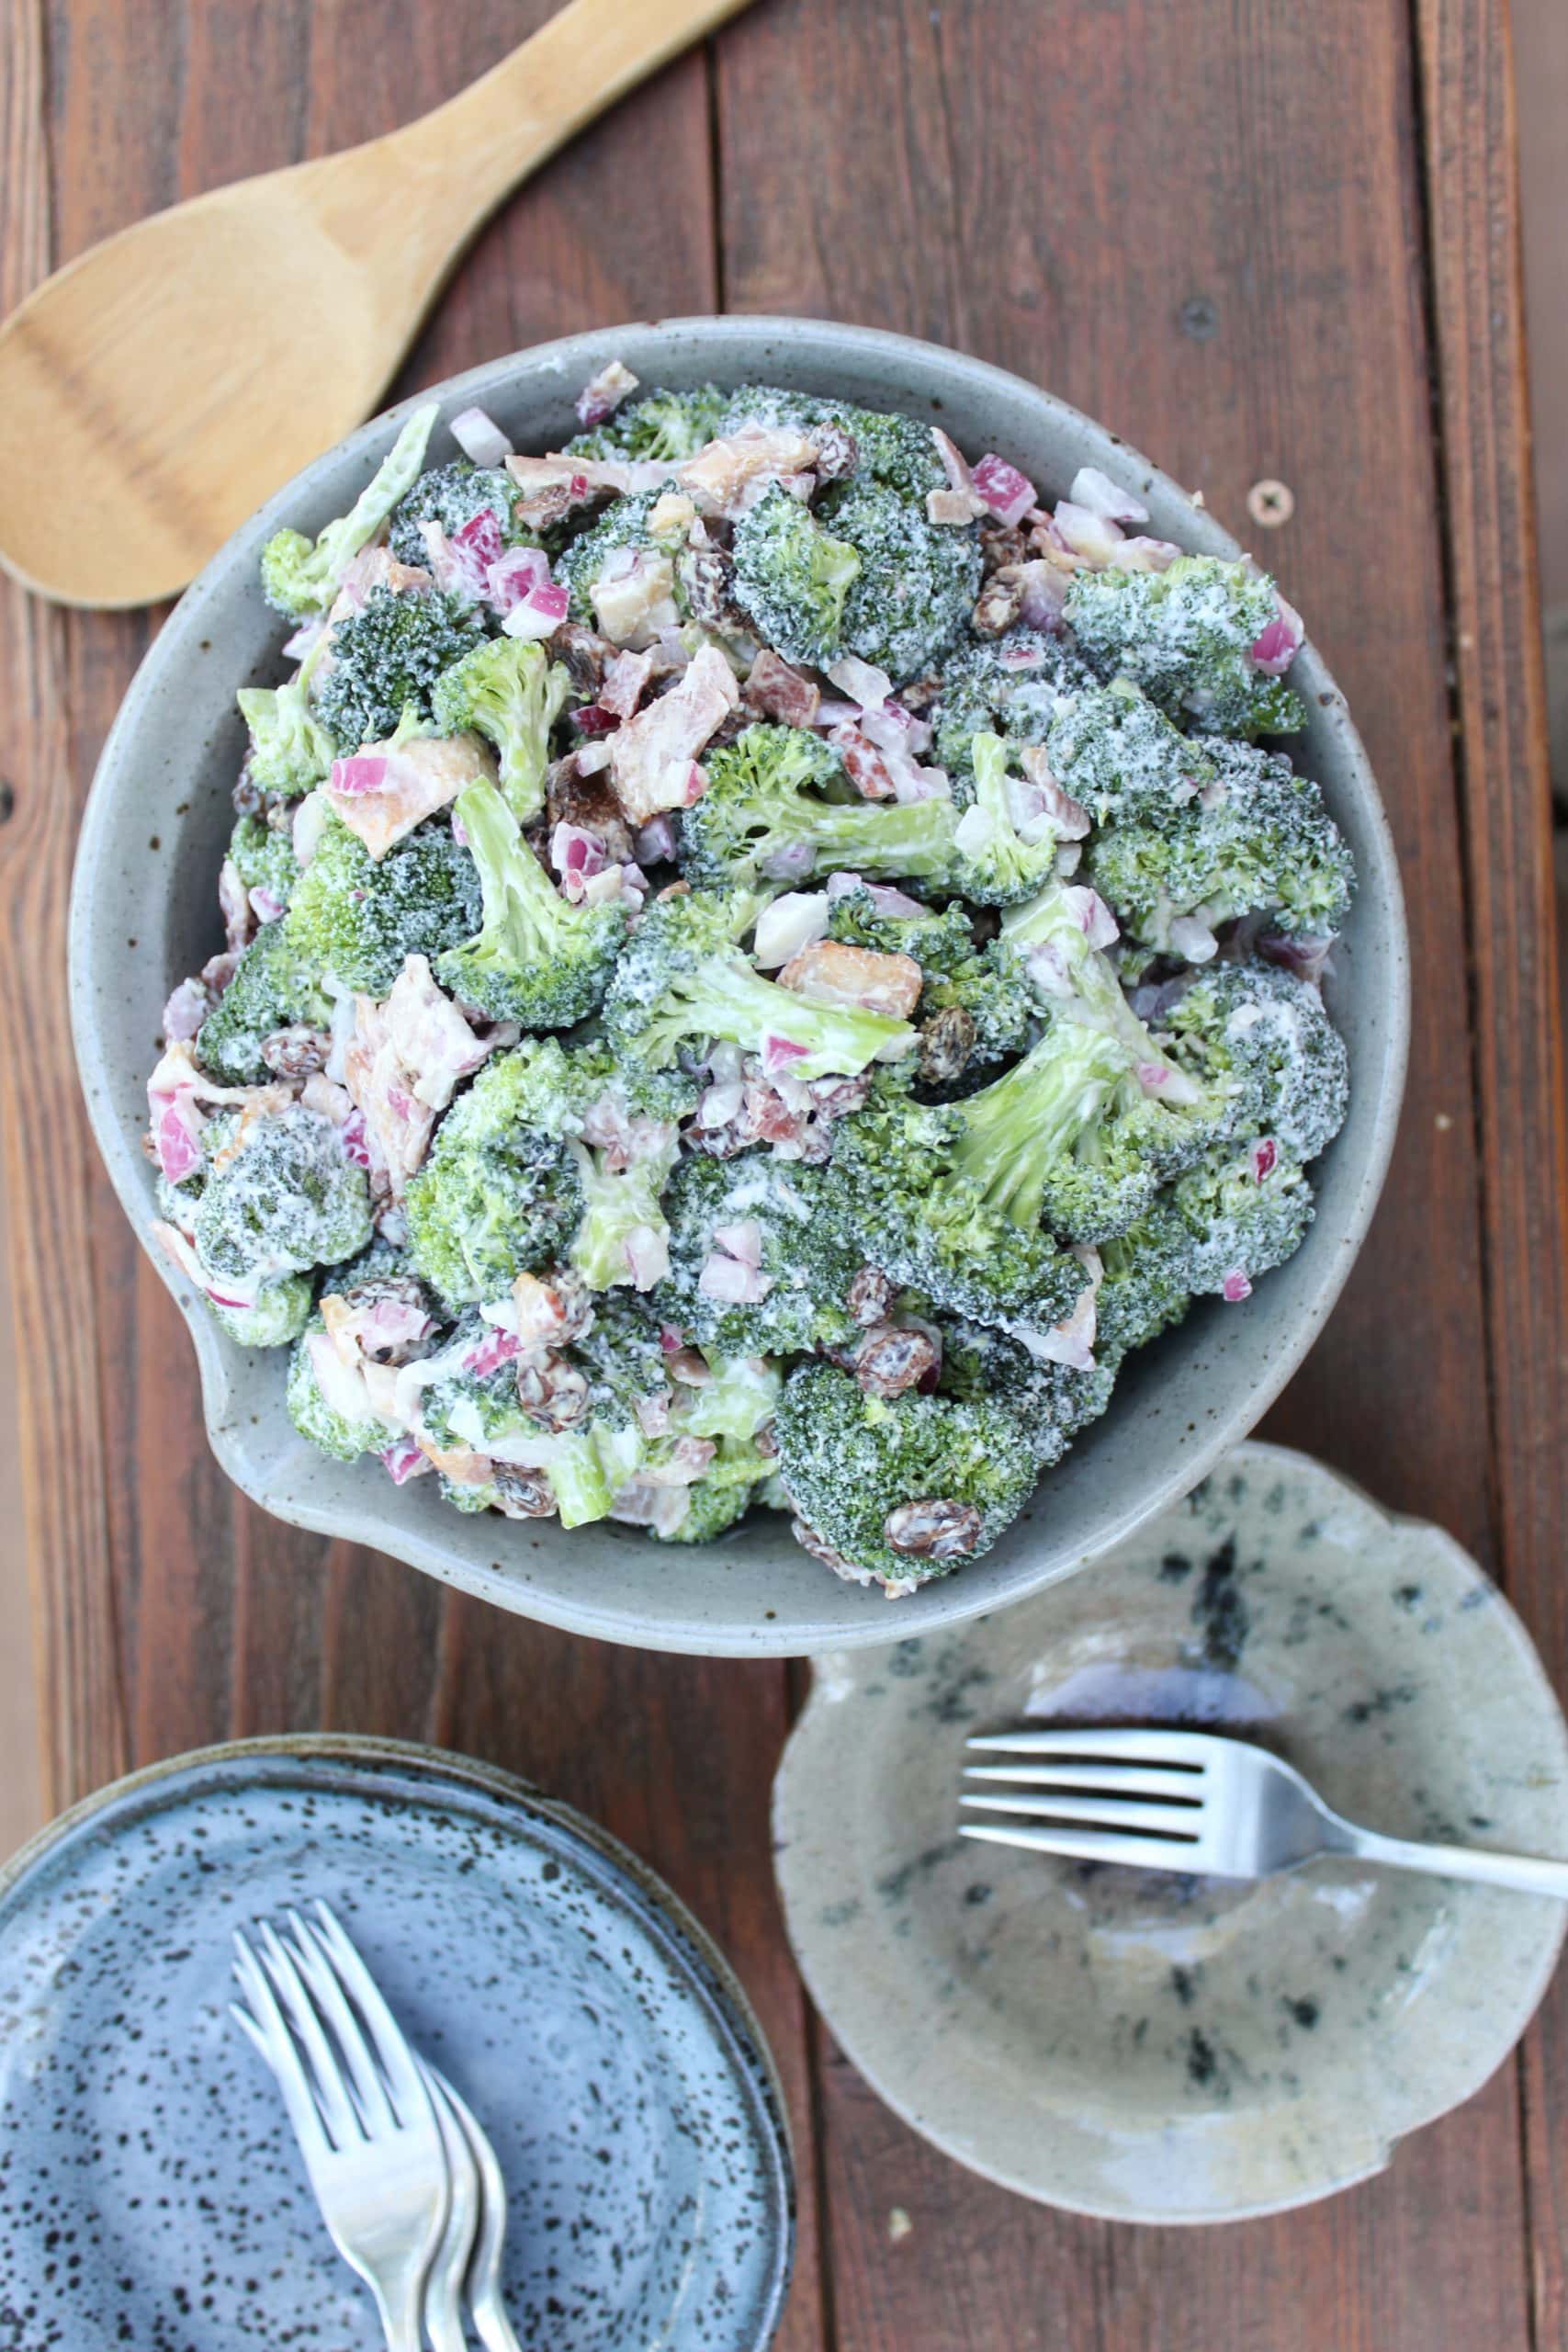 Lightened Up Broccoli Salad So Happy You Liked It